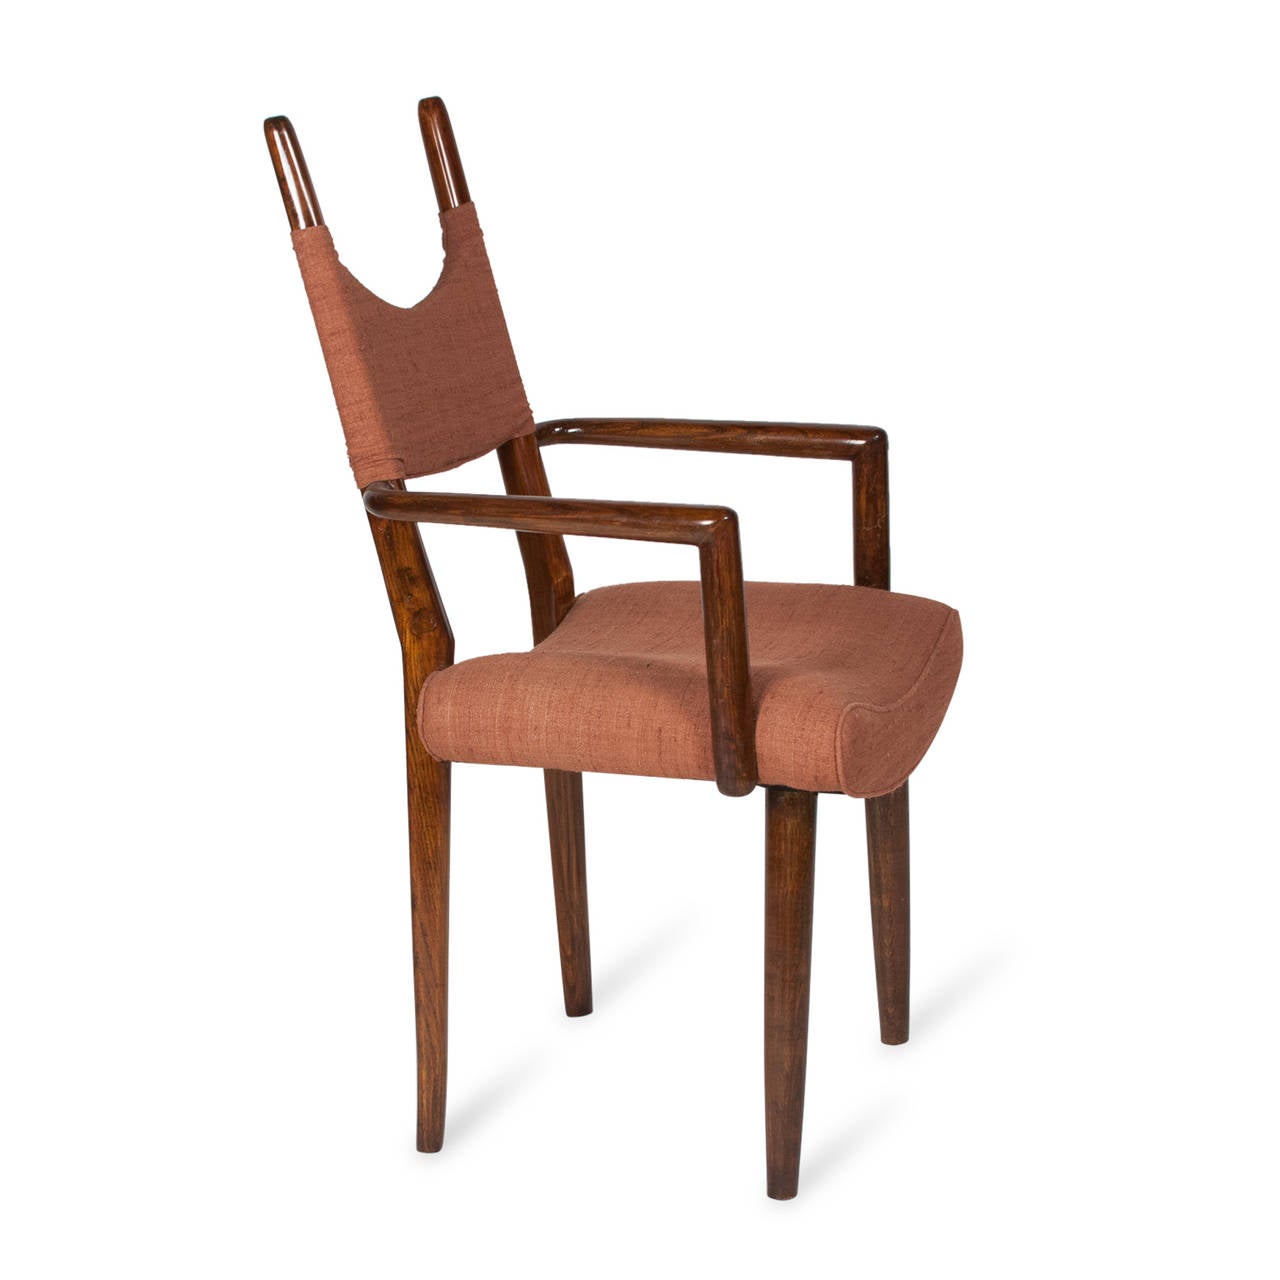 Rosewood Pair of Palissandre Dining Chairs by Jean Royere, French, 1950s For Sale